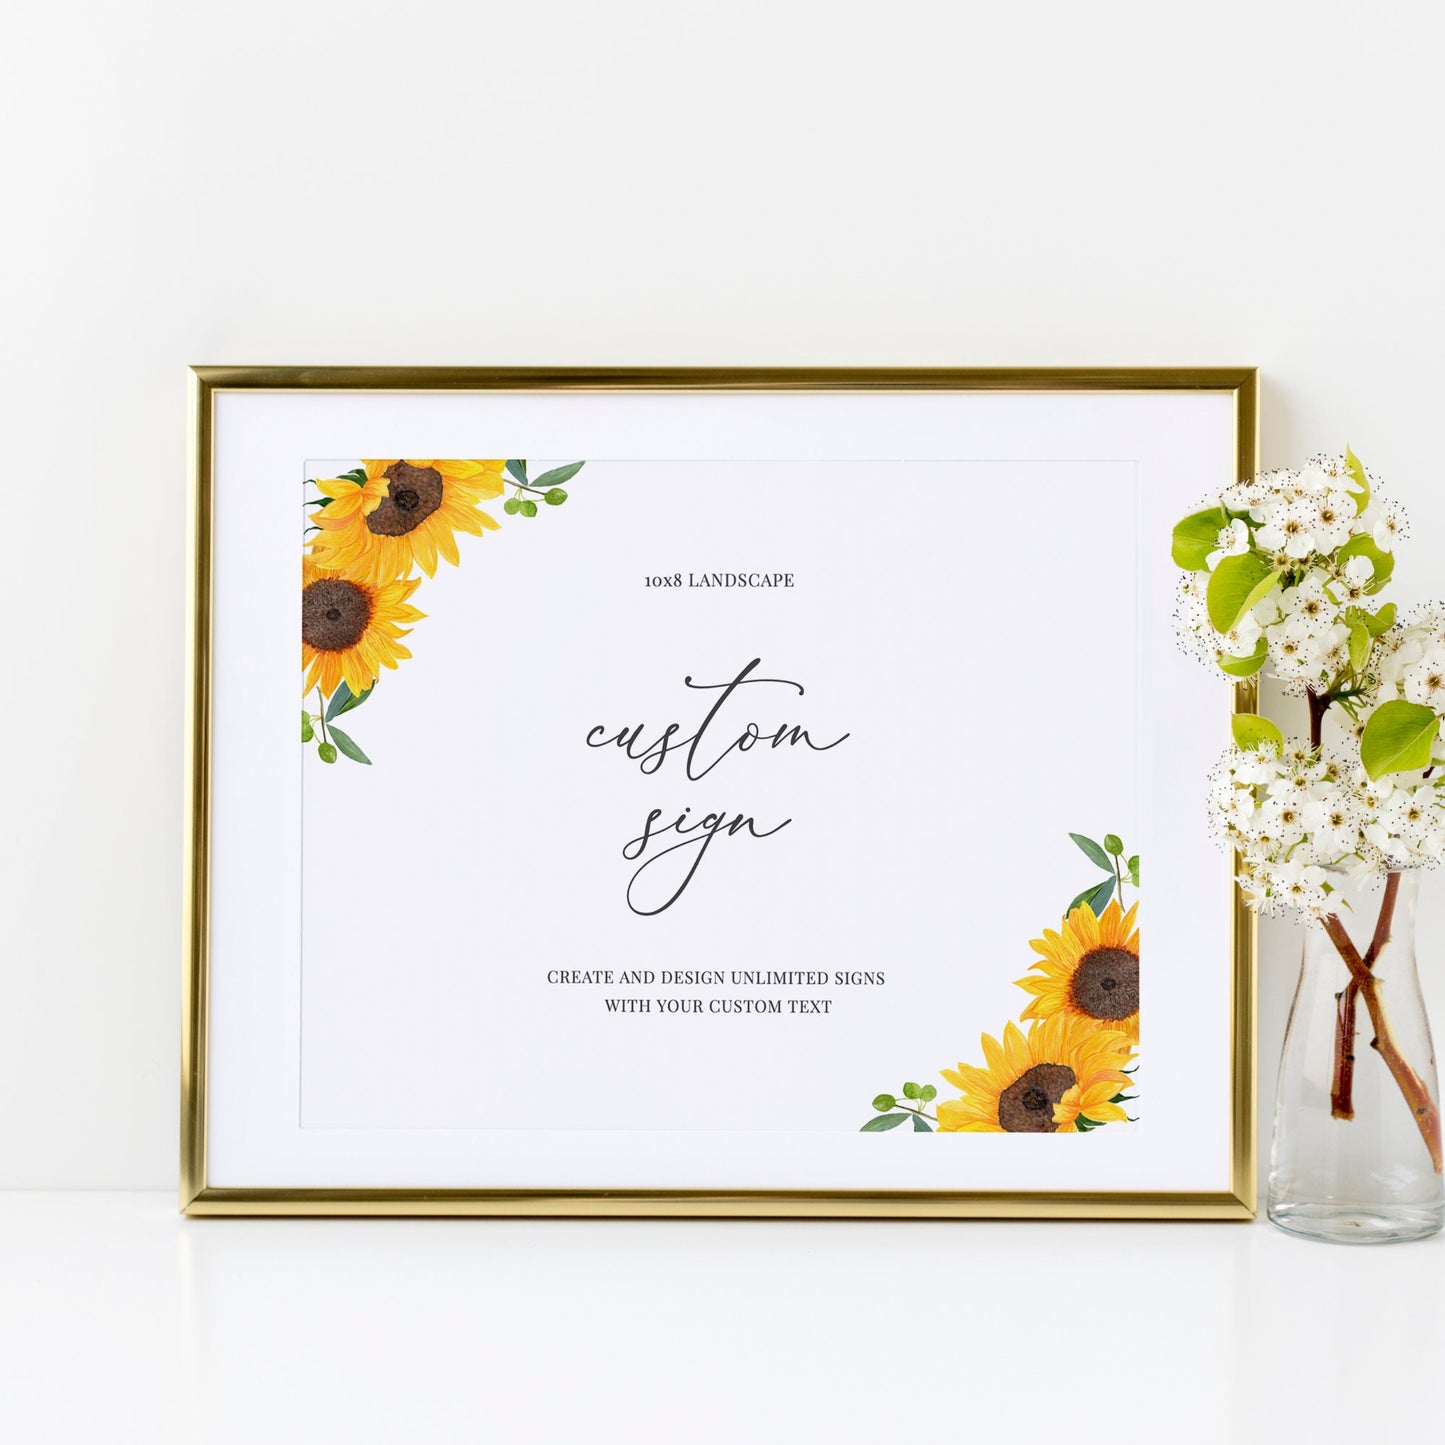 Editable   Custom Wedding Sign Sunflower Rustic Wedding Sign Kit Create Unlimited Signs 8x10 and 10x8 Template